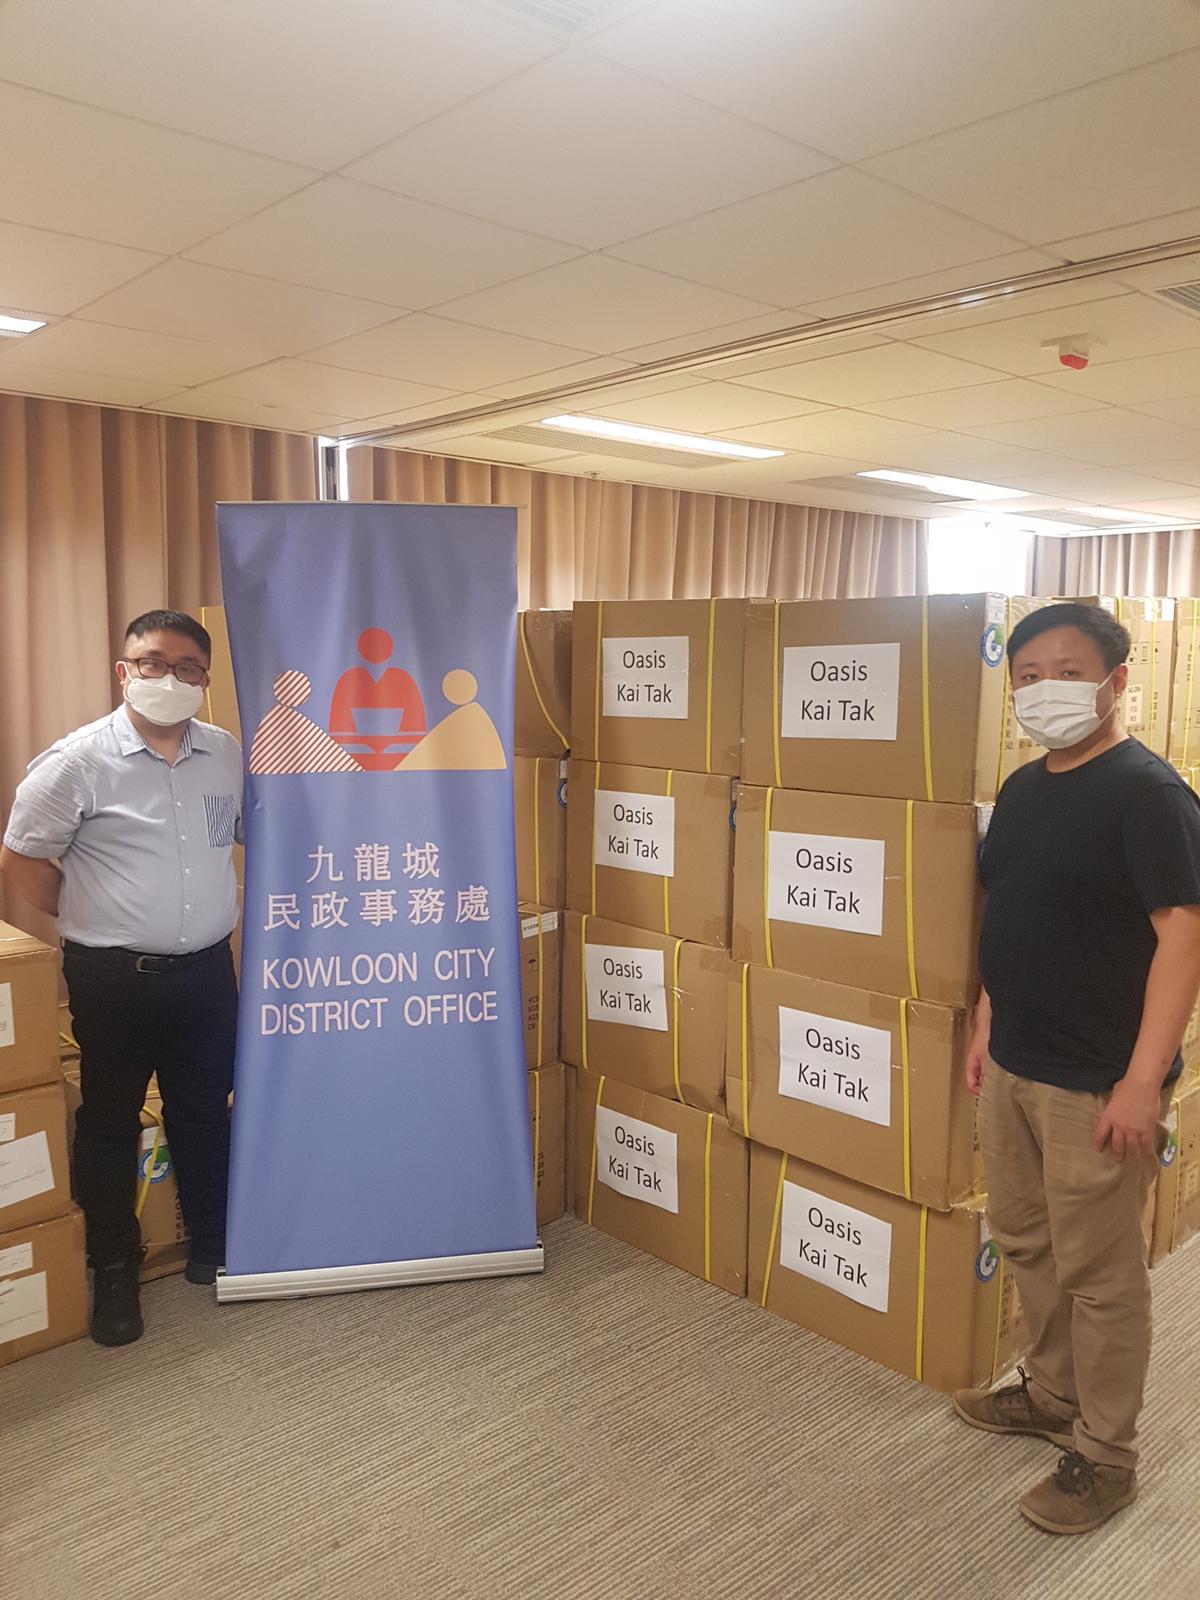 The Kowloon City District Office distributed COVID-19 rapid test kits to households, cleansing workers and property management staff living and working in Oasis Kai Tak for voluntary testing through the property management company.